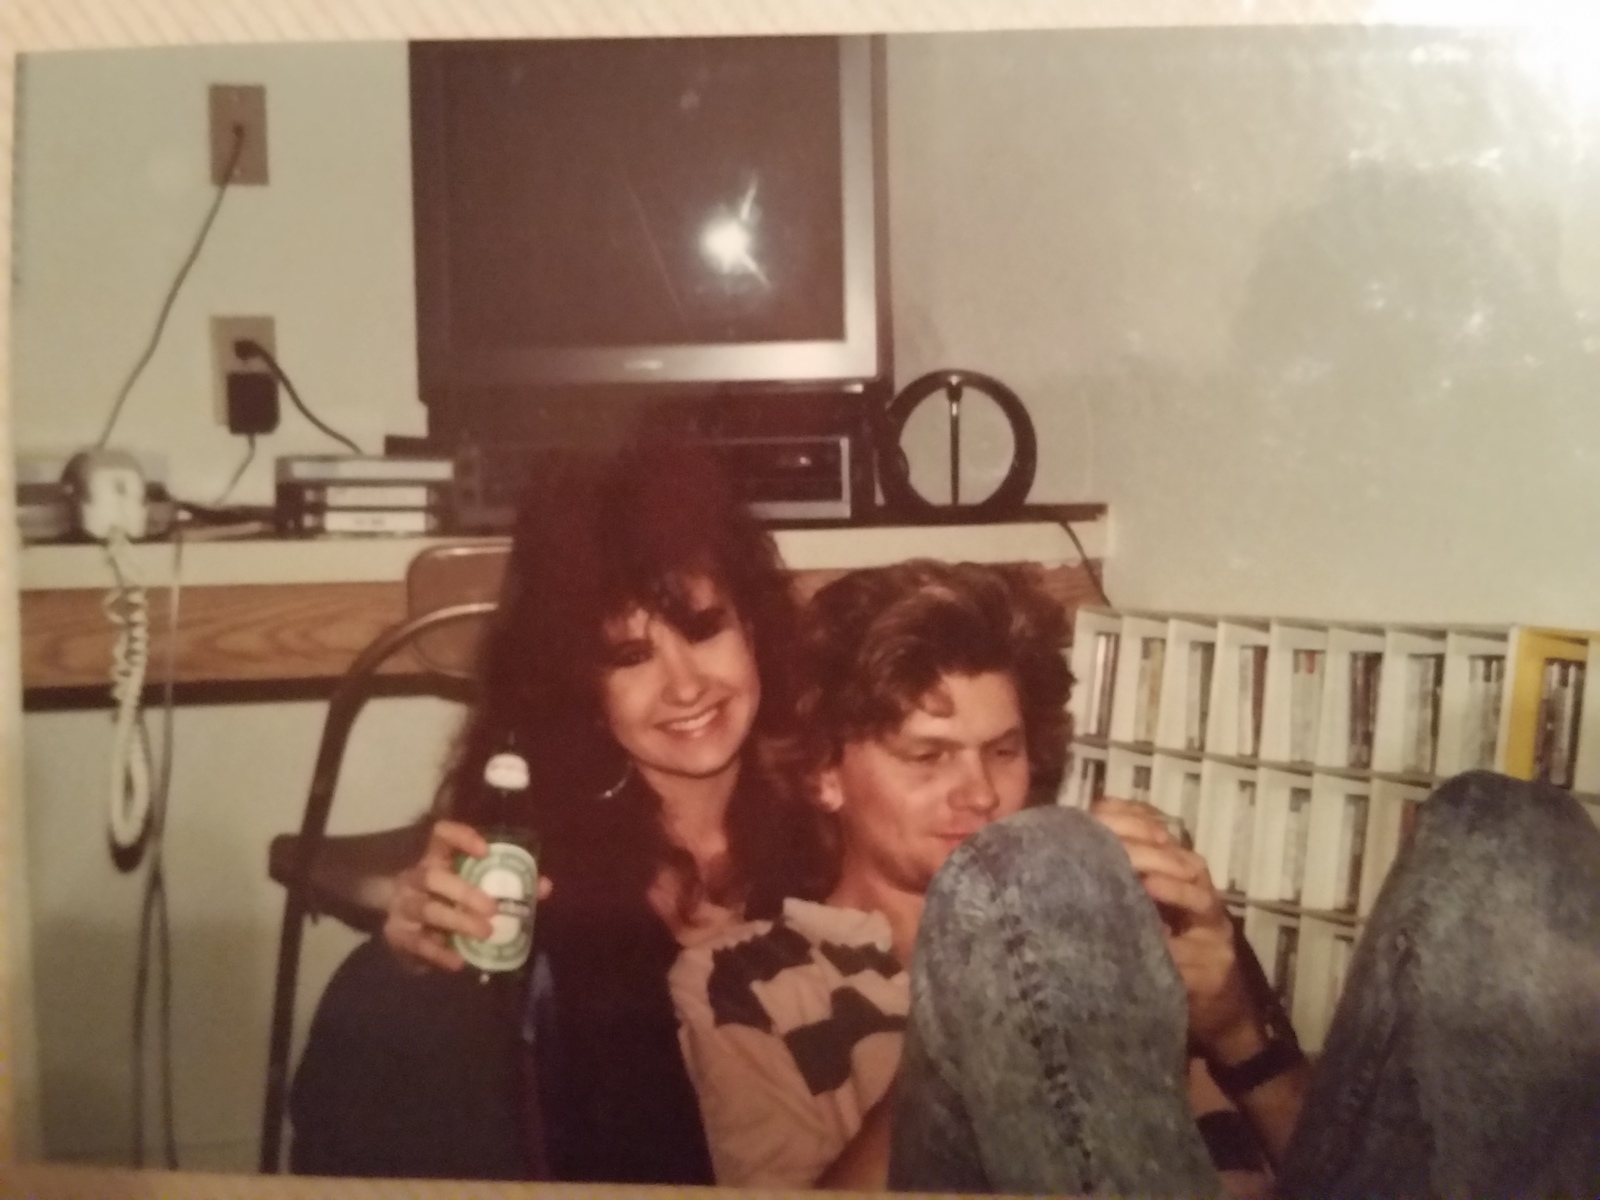 Just young pups we were... 1989 at our friends apartment. I still tell her how lucky she is to this day...hahaha